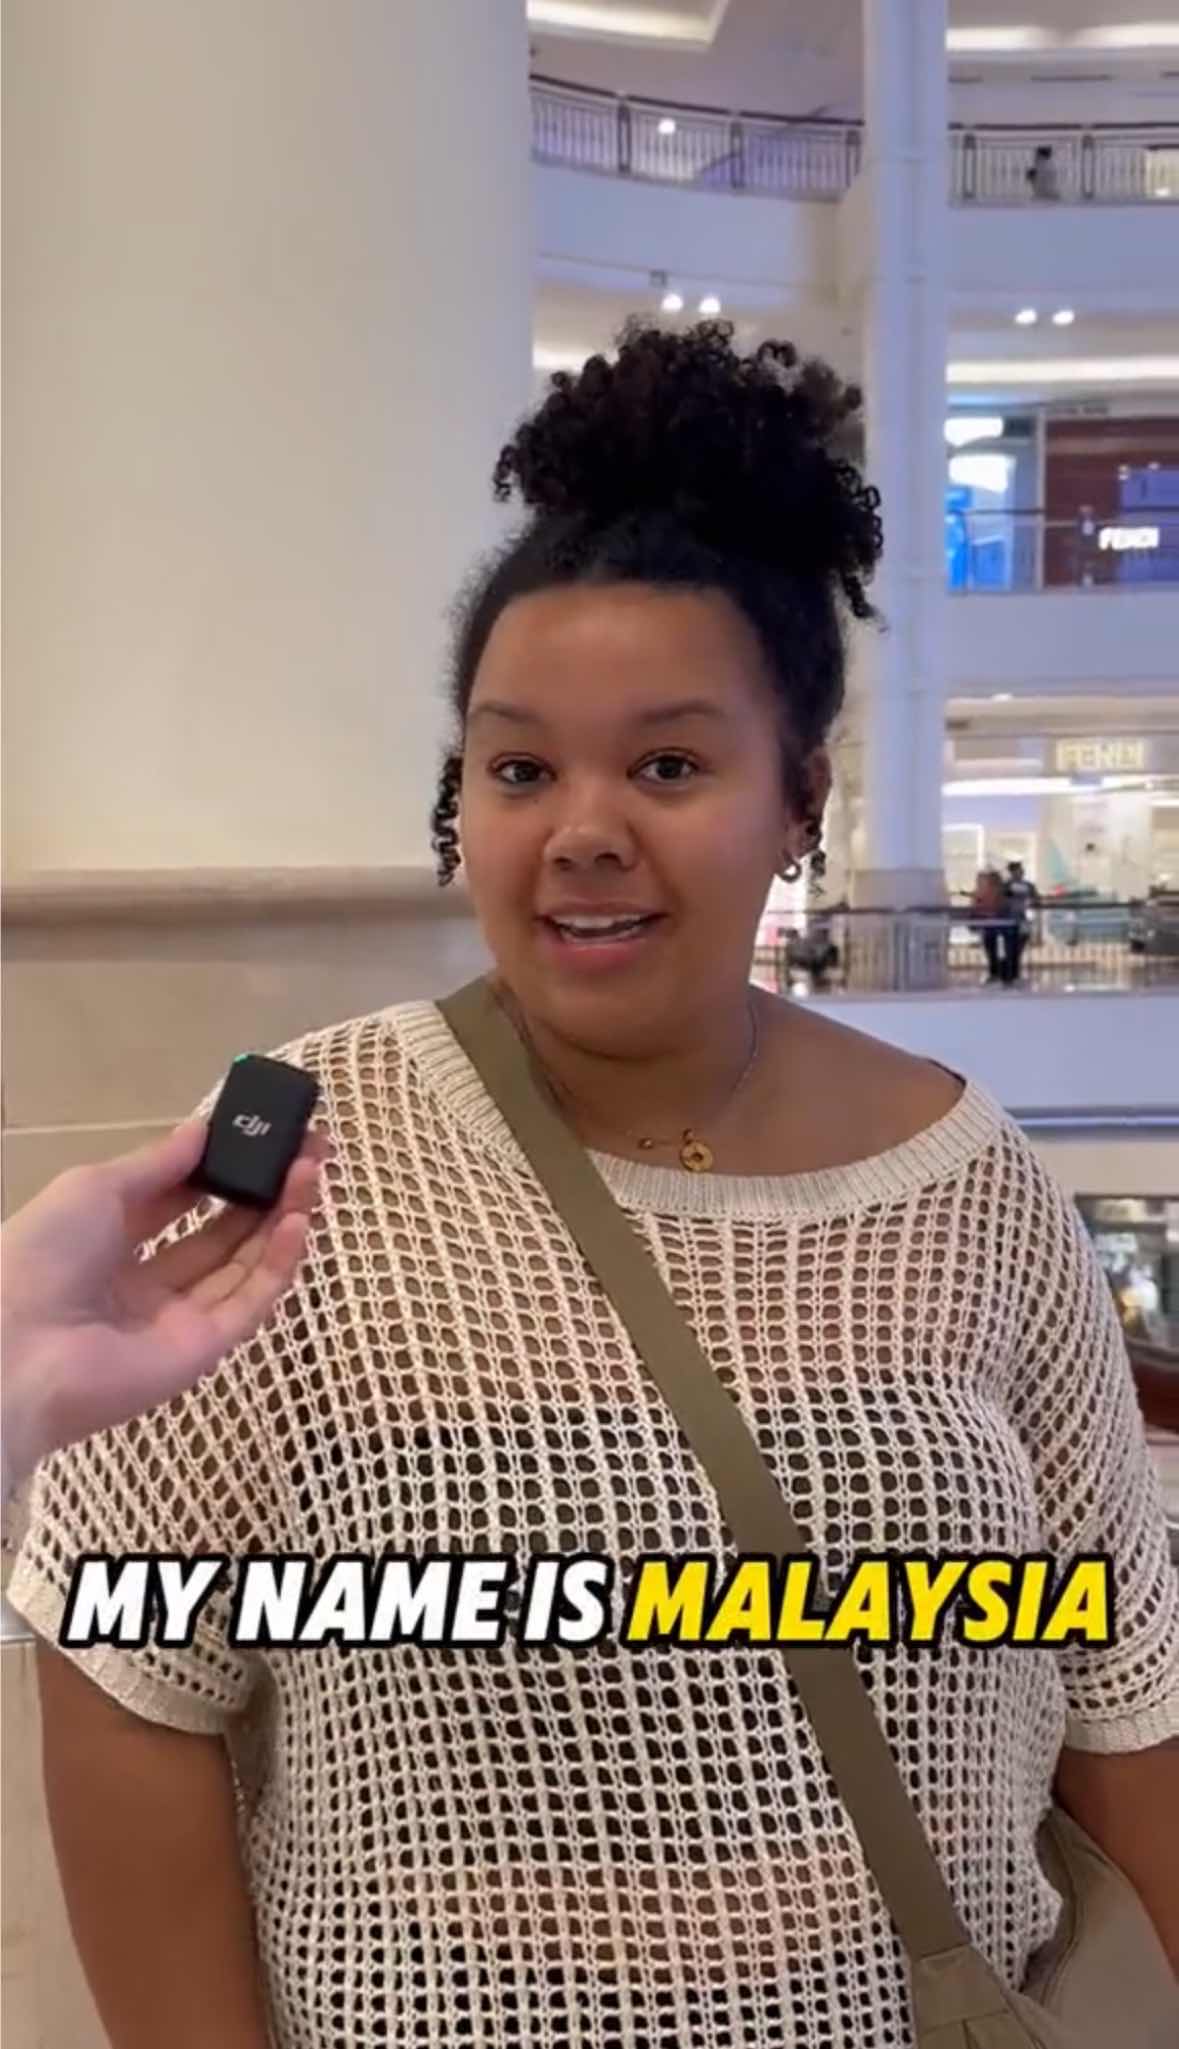 American woman sharing her name